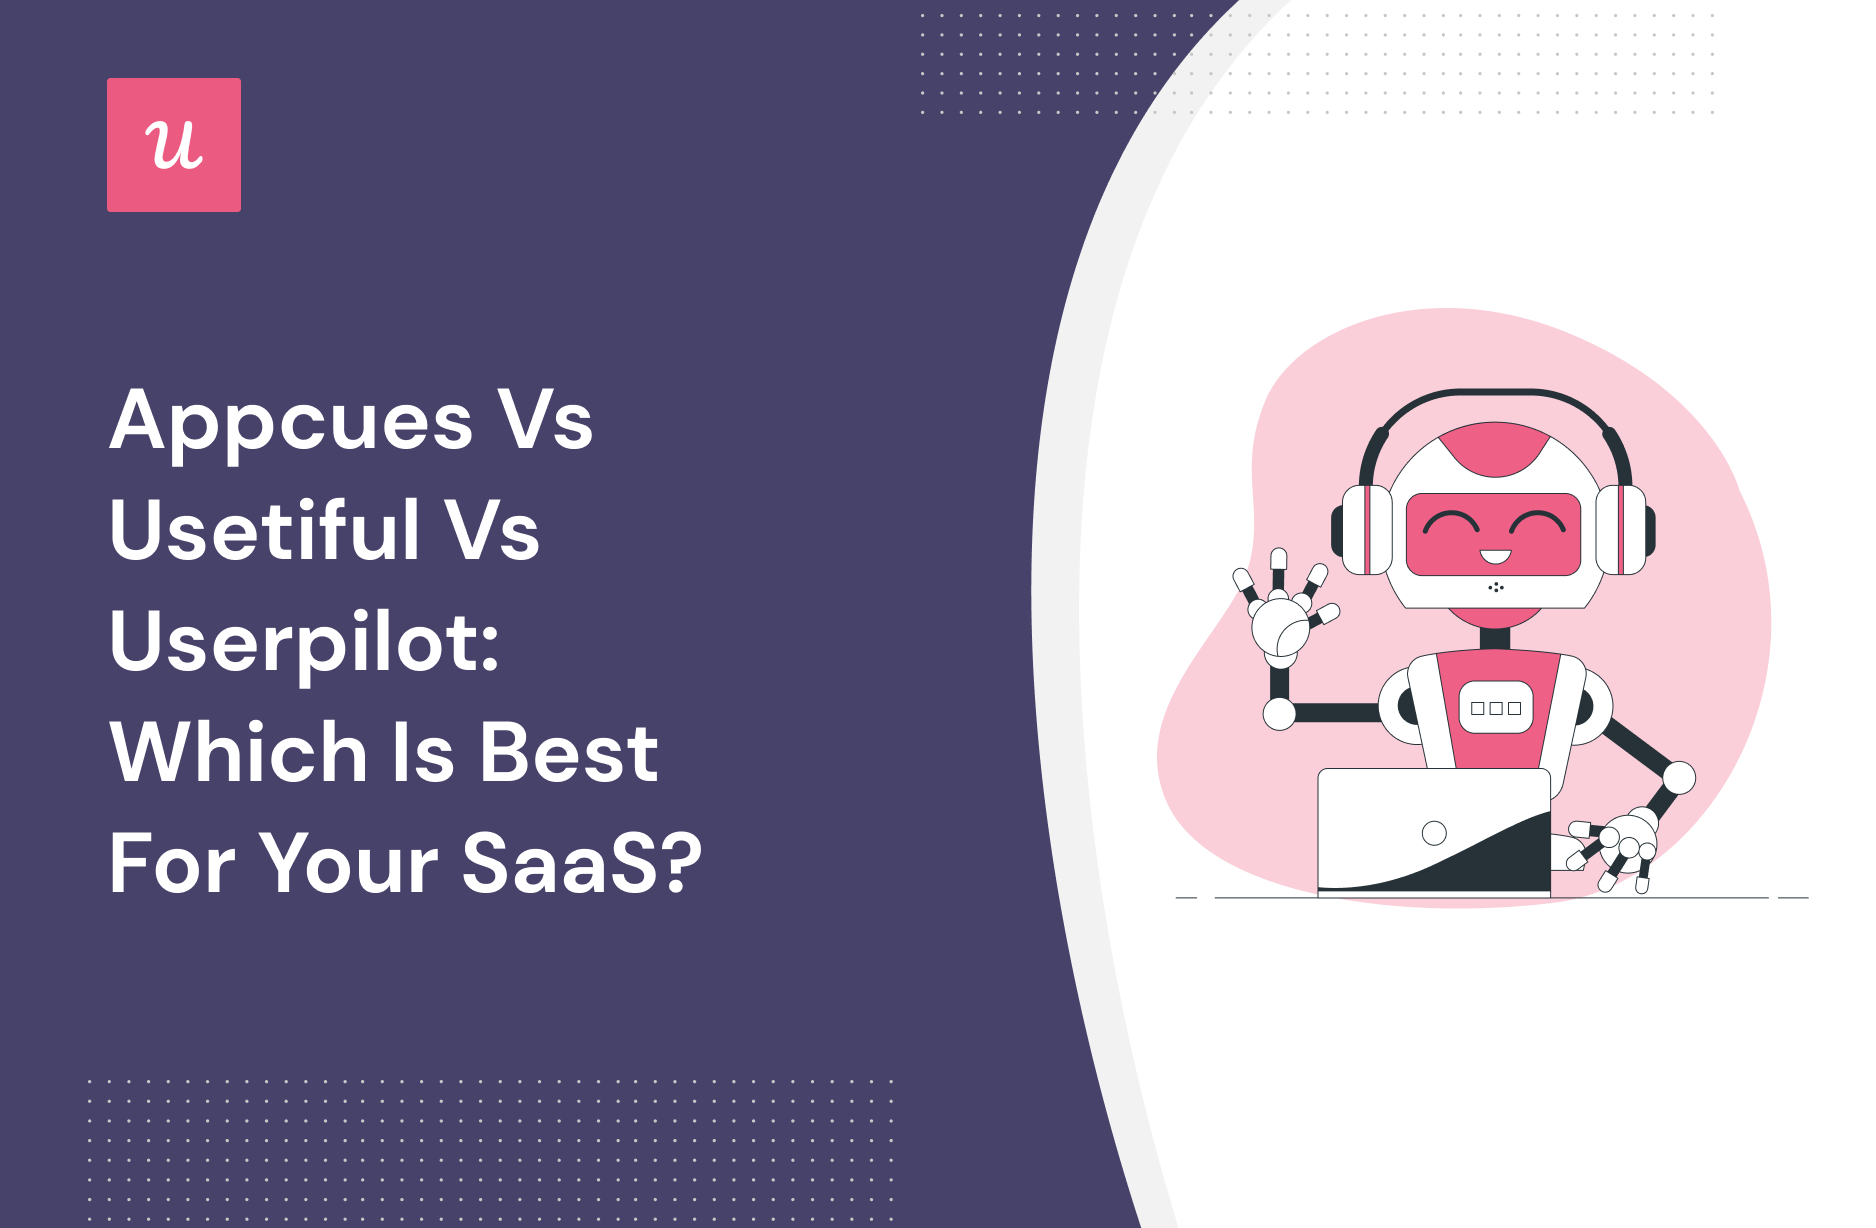 Appcues vs Usetiful vs Userpilot: Which is Best for Your SaaS?